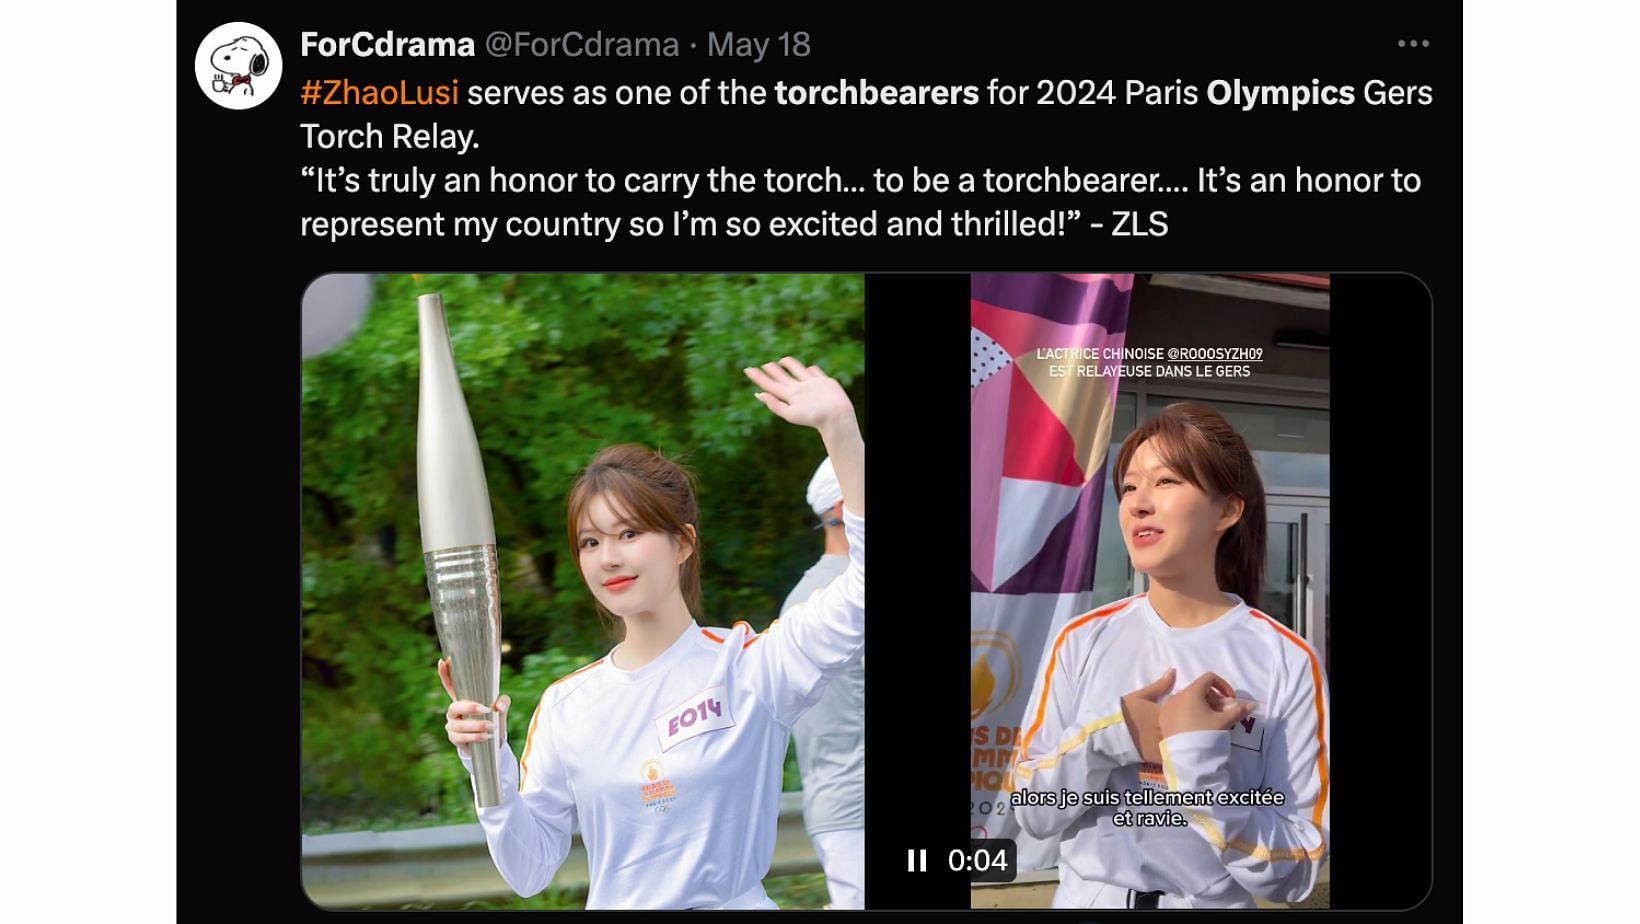 Zhao Lusi serves as one of the torchbearers for the 2024 Paris Olympics Gers Torch Relay. (Images via X/@ForCdrama)